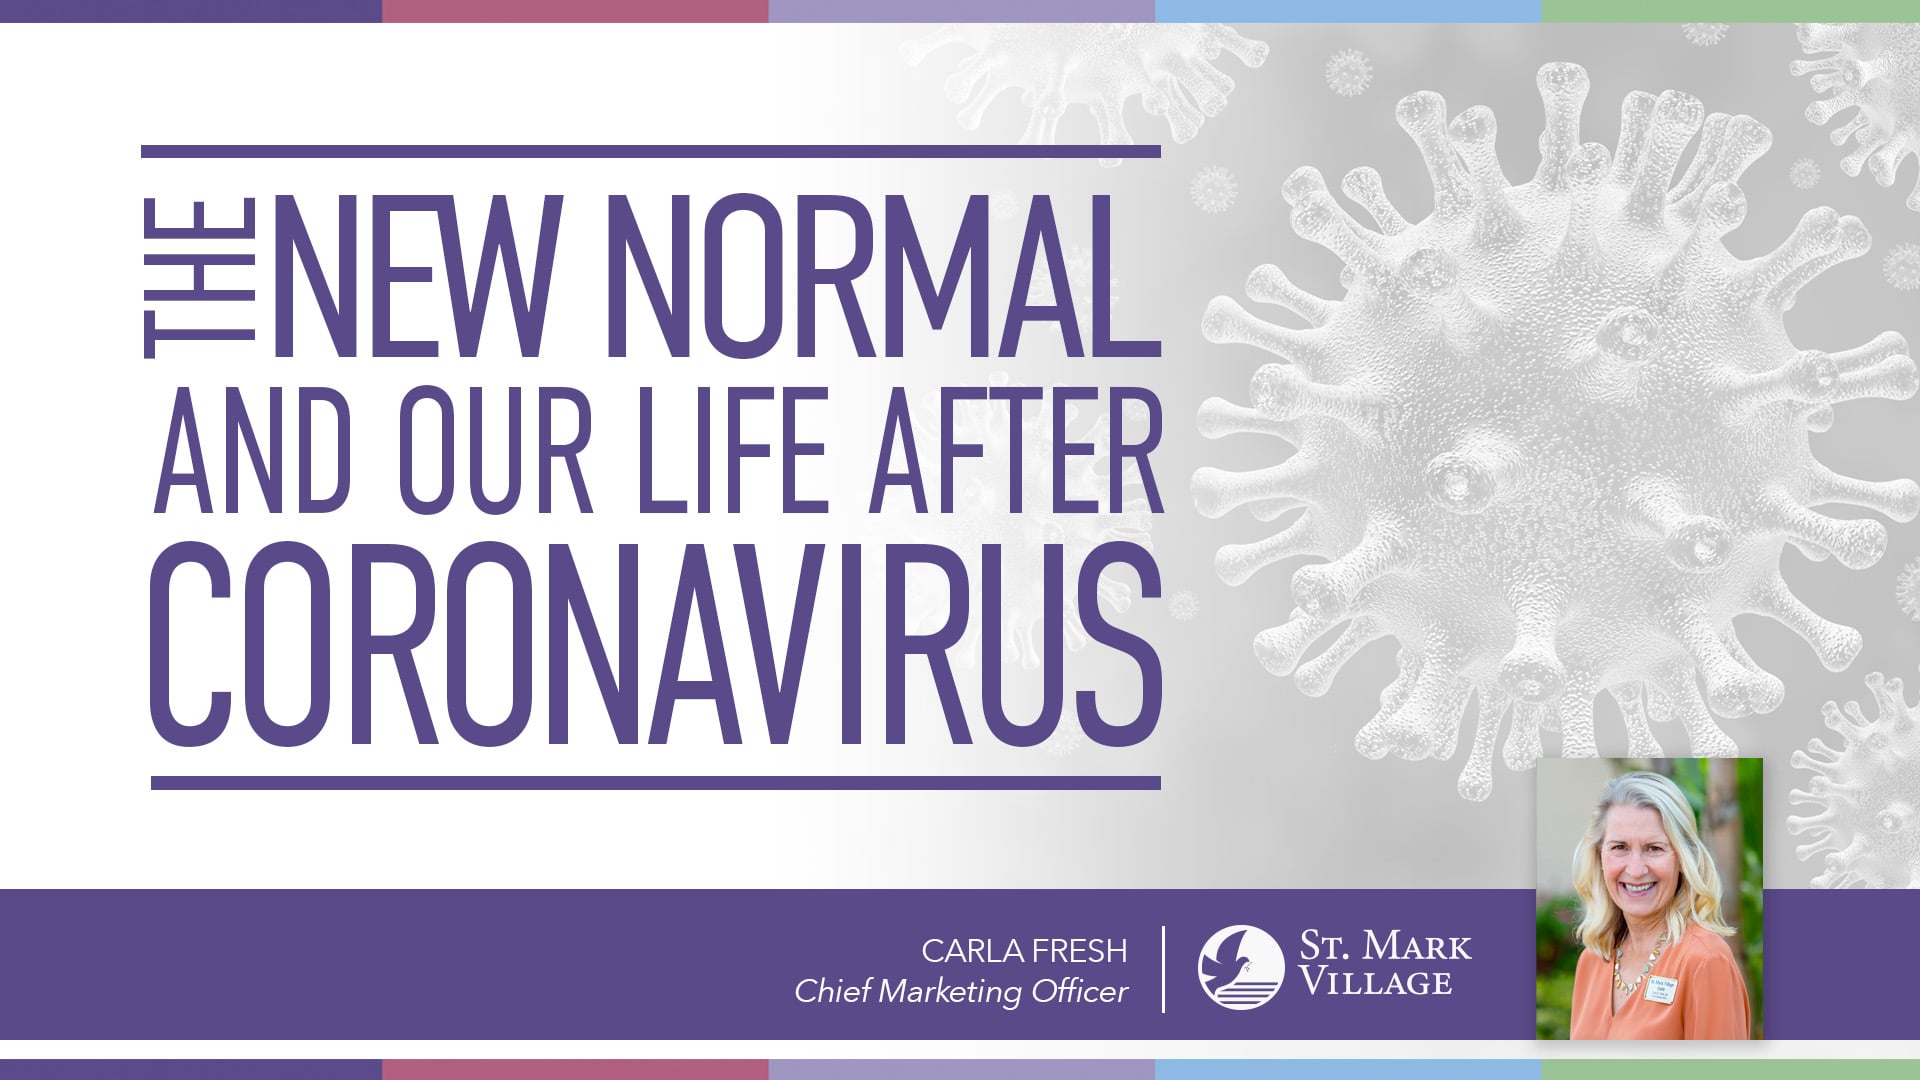 The new normal and our life after coronavirus.